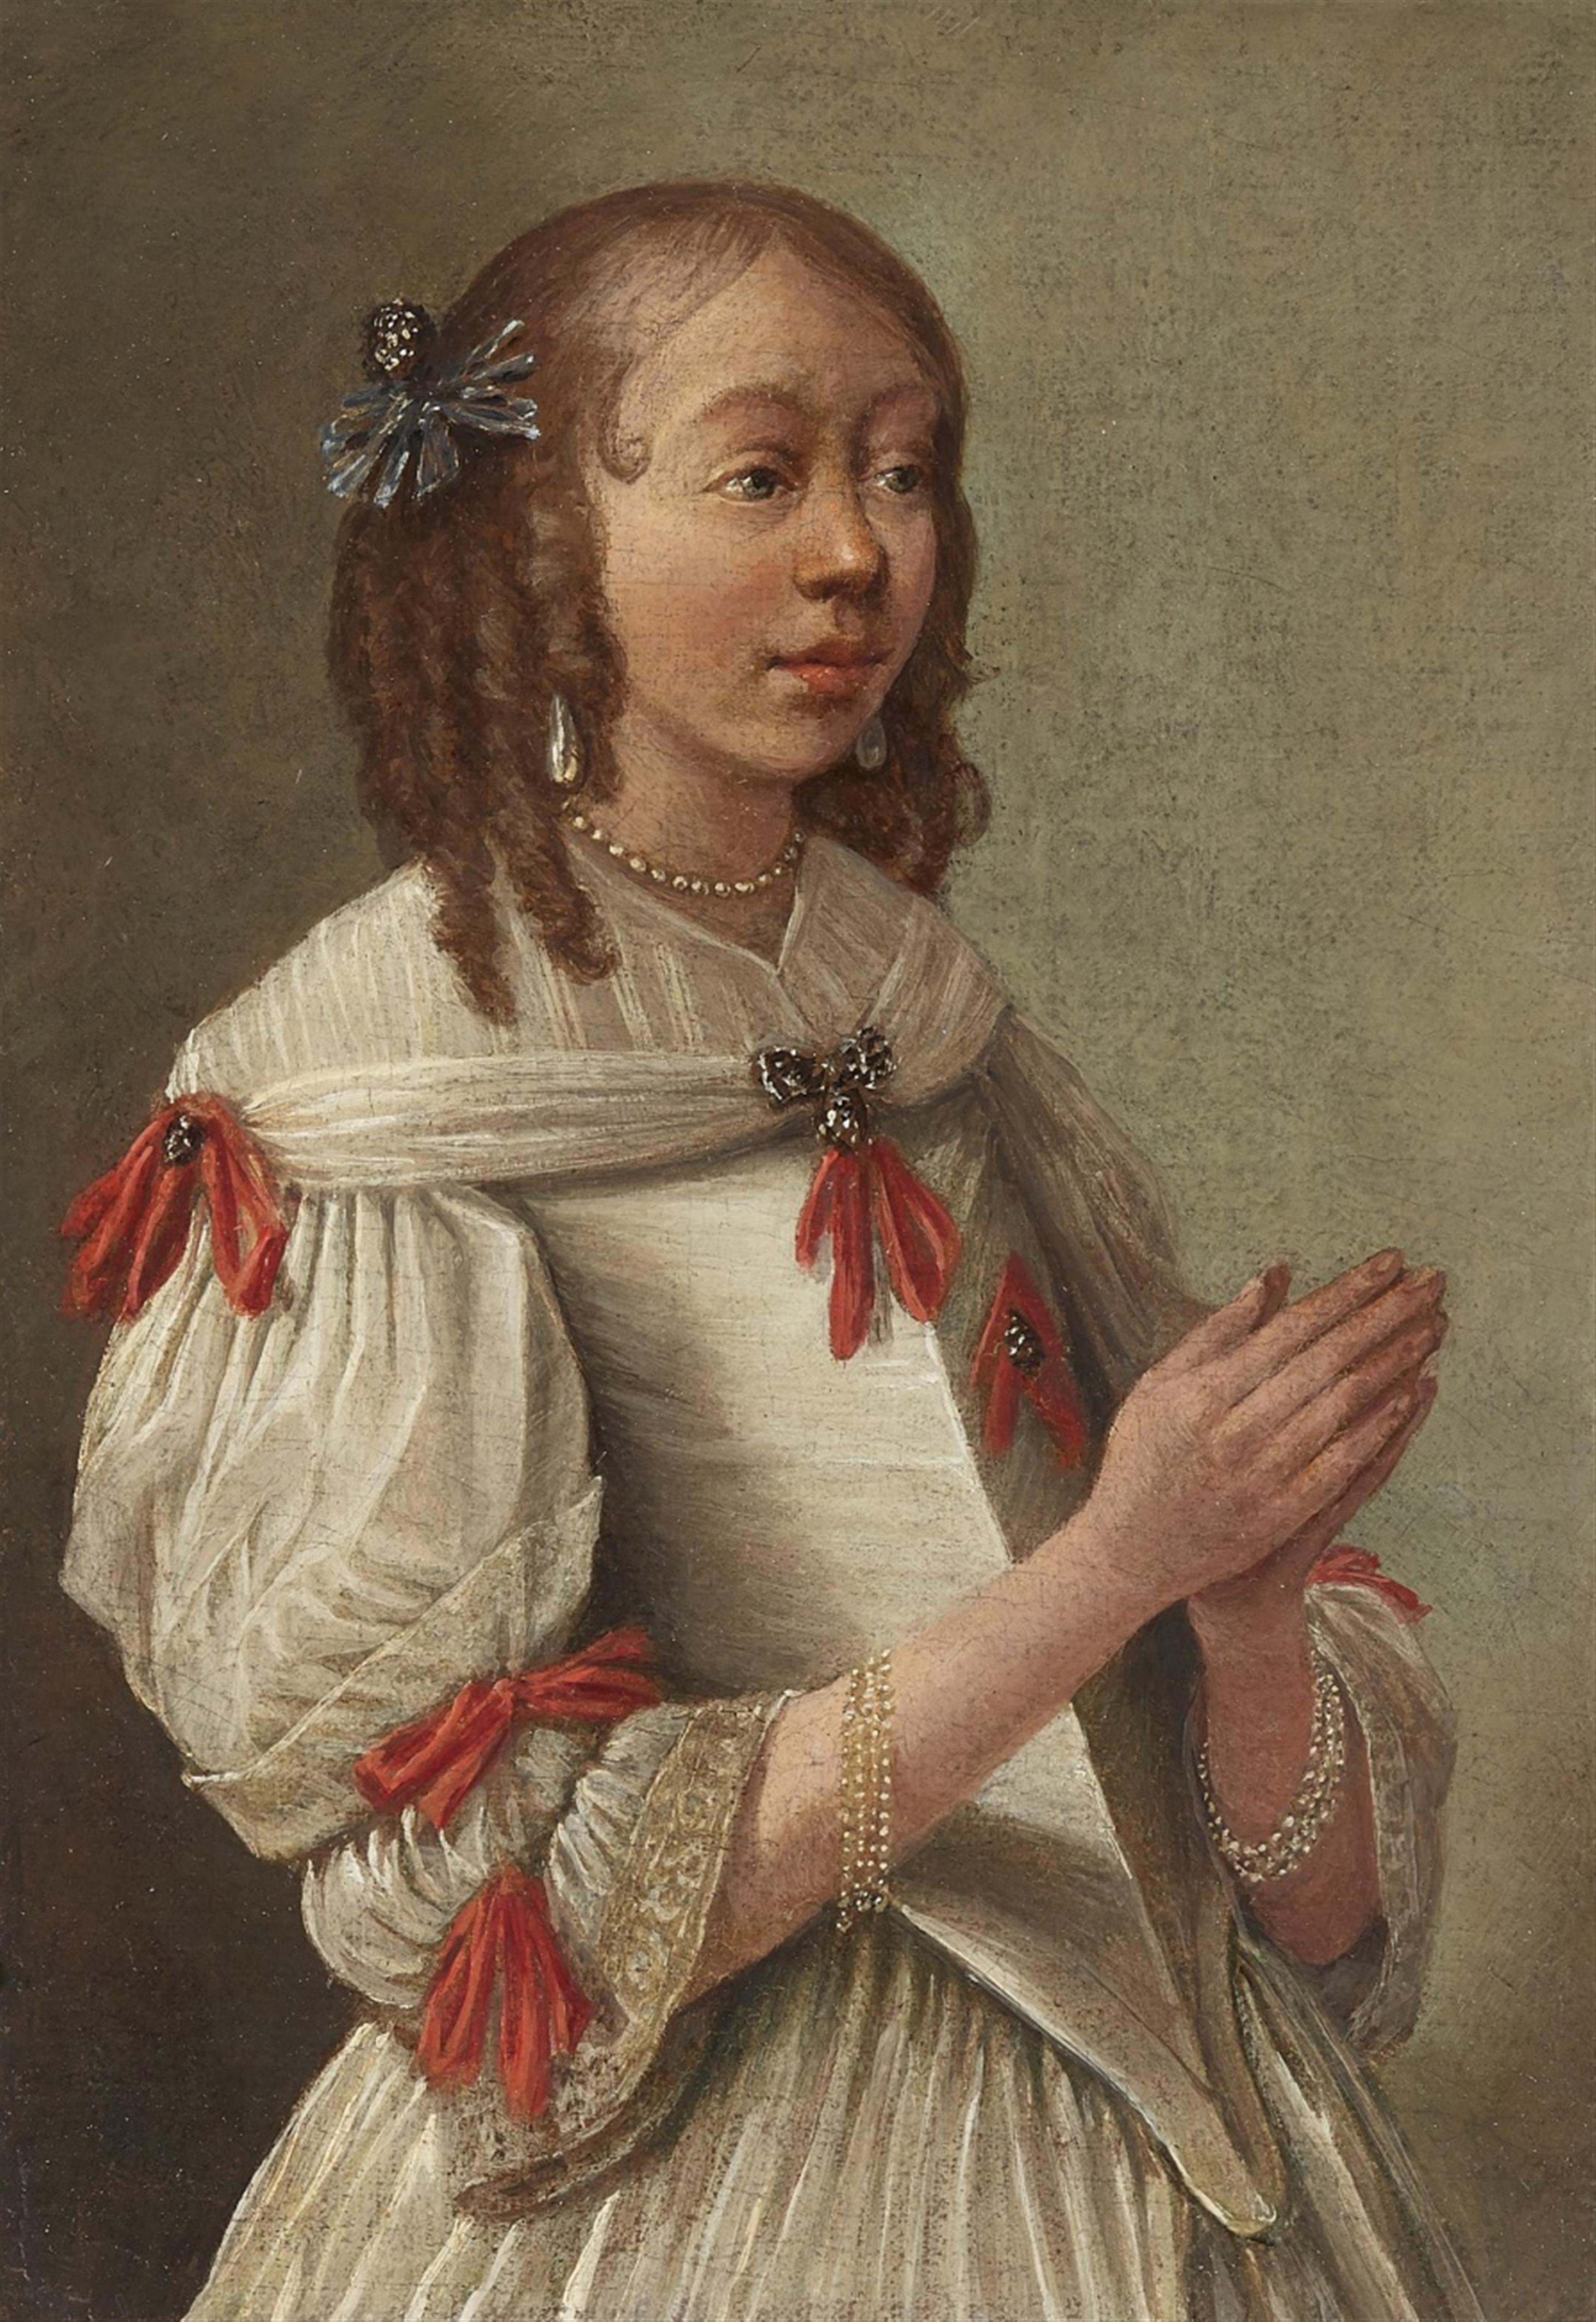 Dutch School 17th century - Portrait of a Young Woman with Clasped Hands - image-1